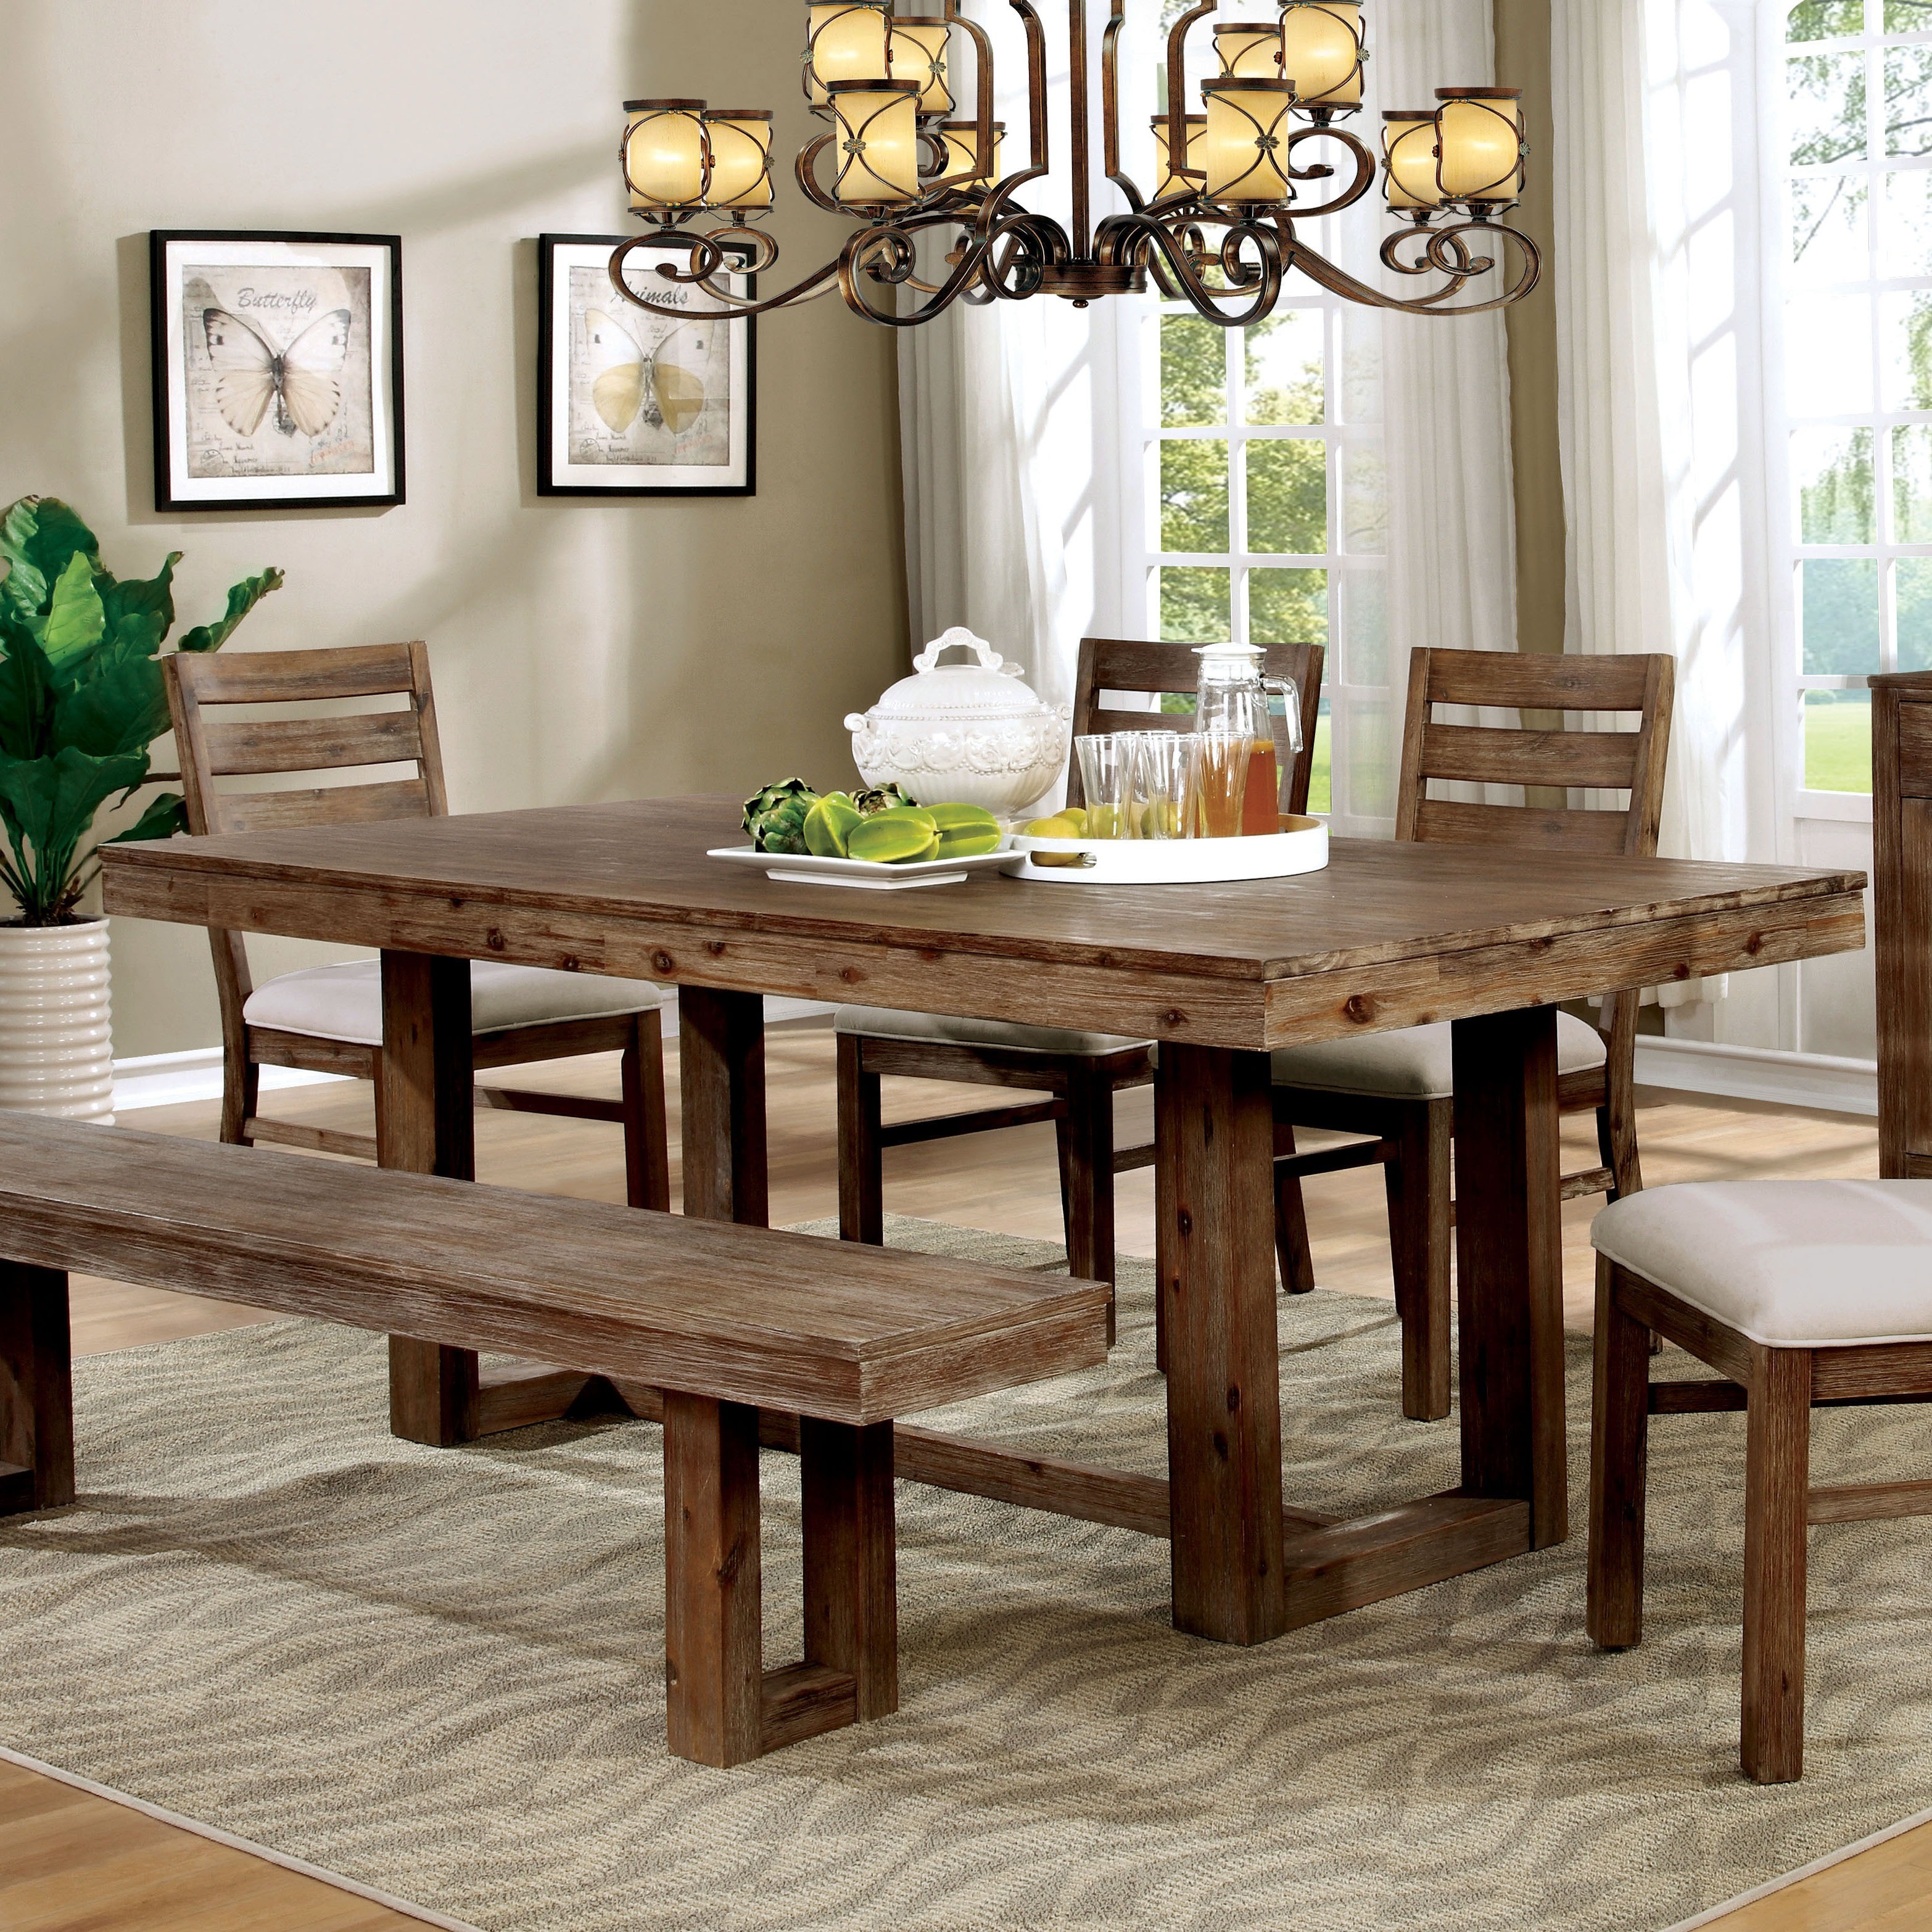 Furniture Of America Treville Country Farmhouse Natural Tone Plank Style Dining Table 623d6872 73d4 4a2f 81c2 8fa4c513feeb 